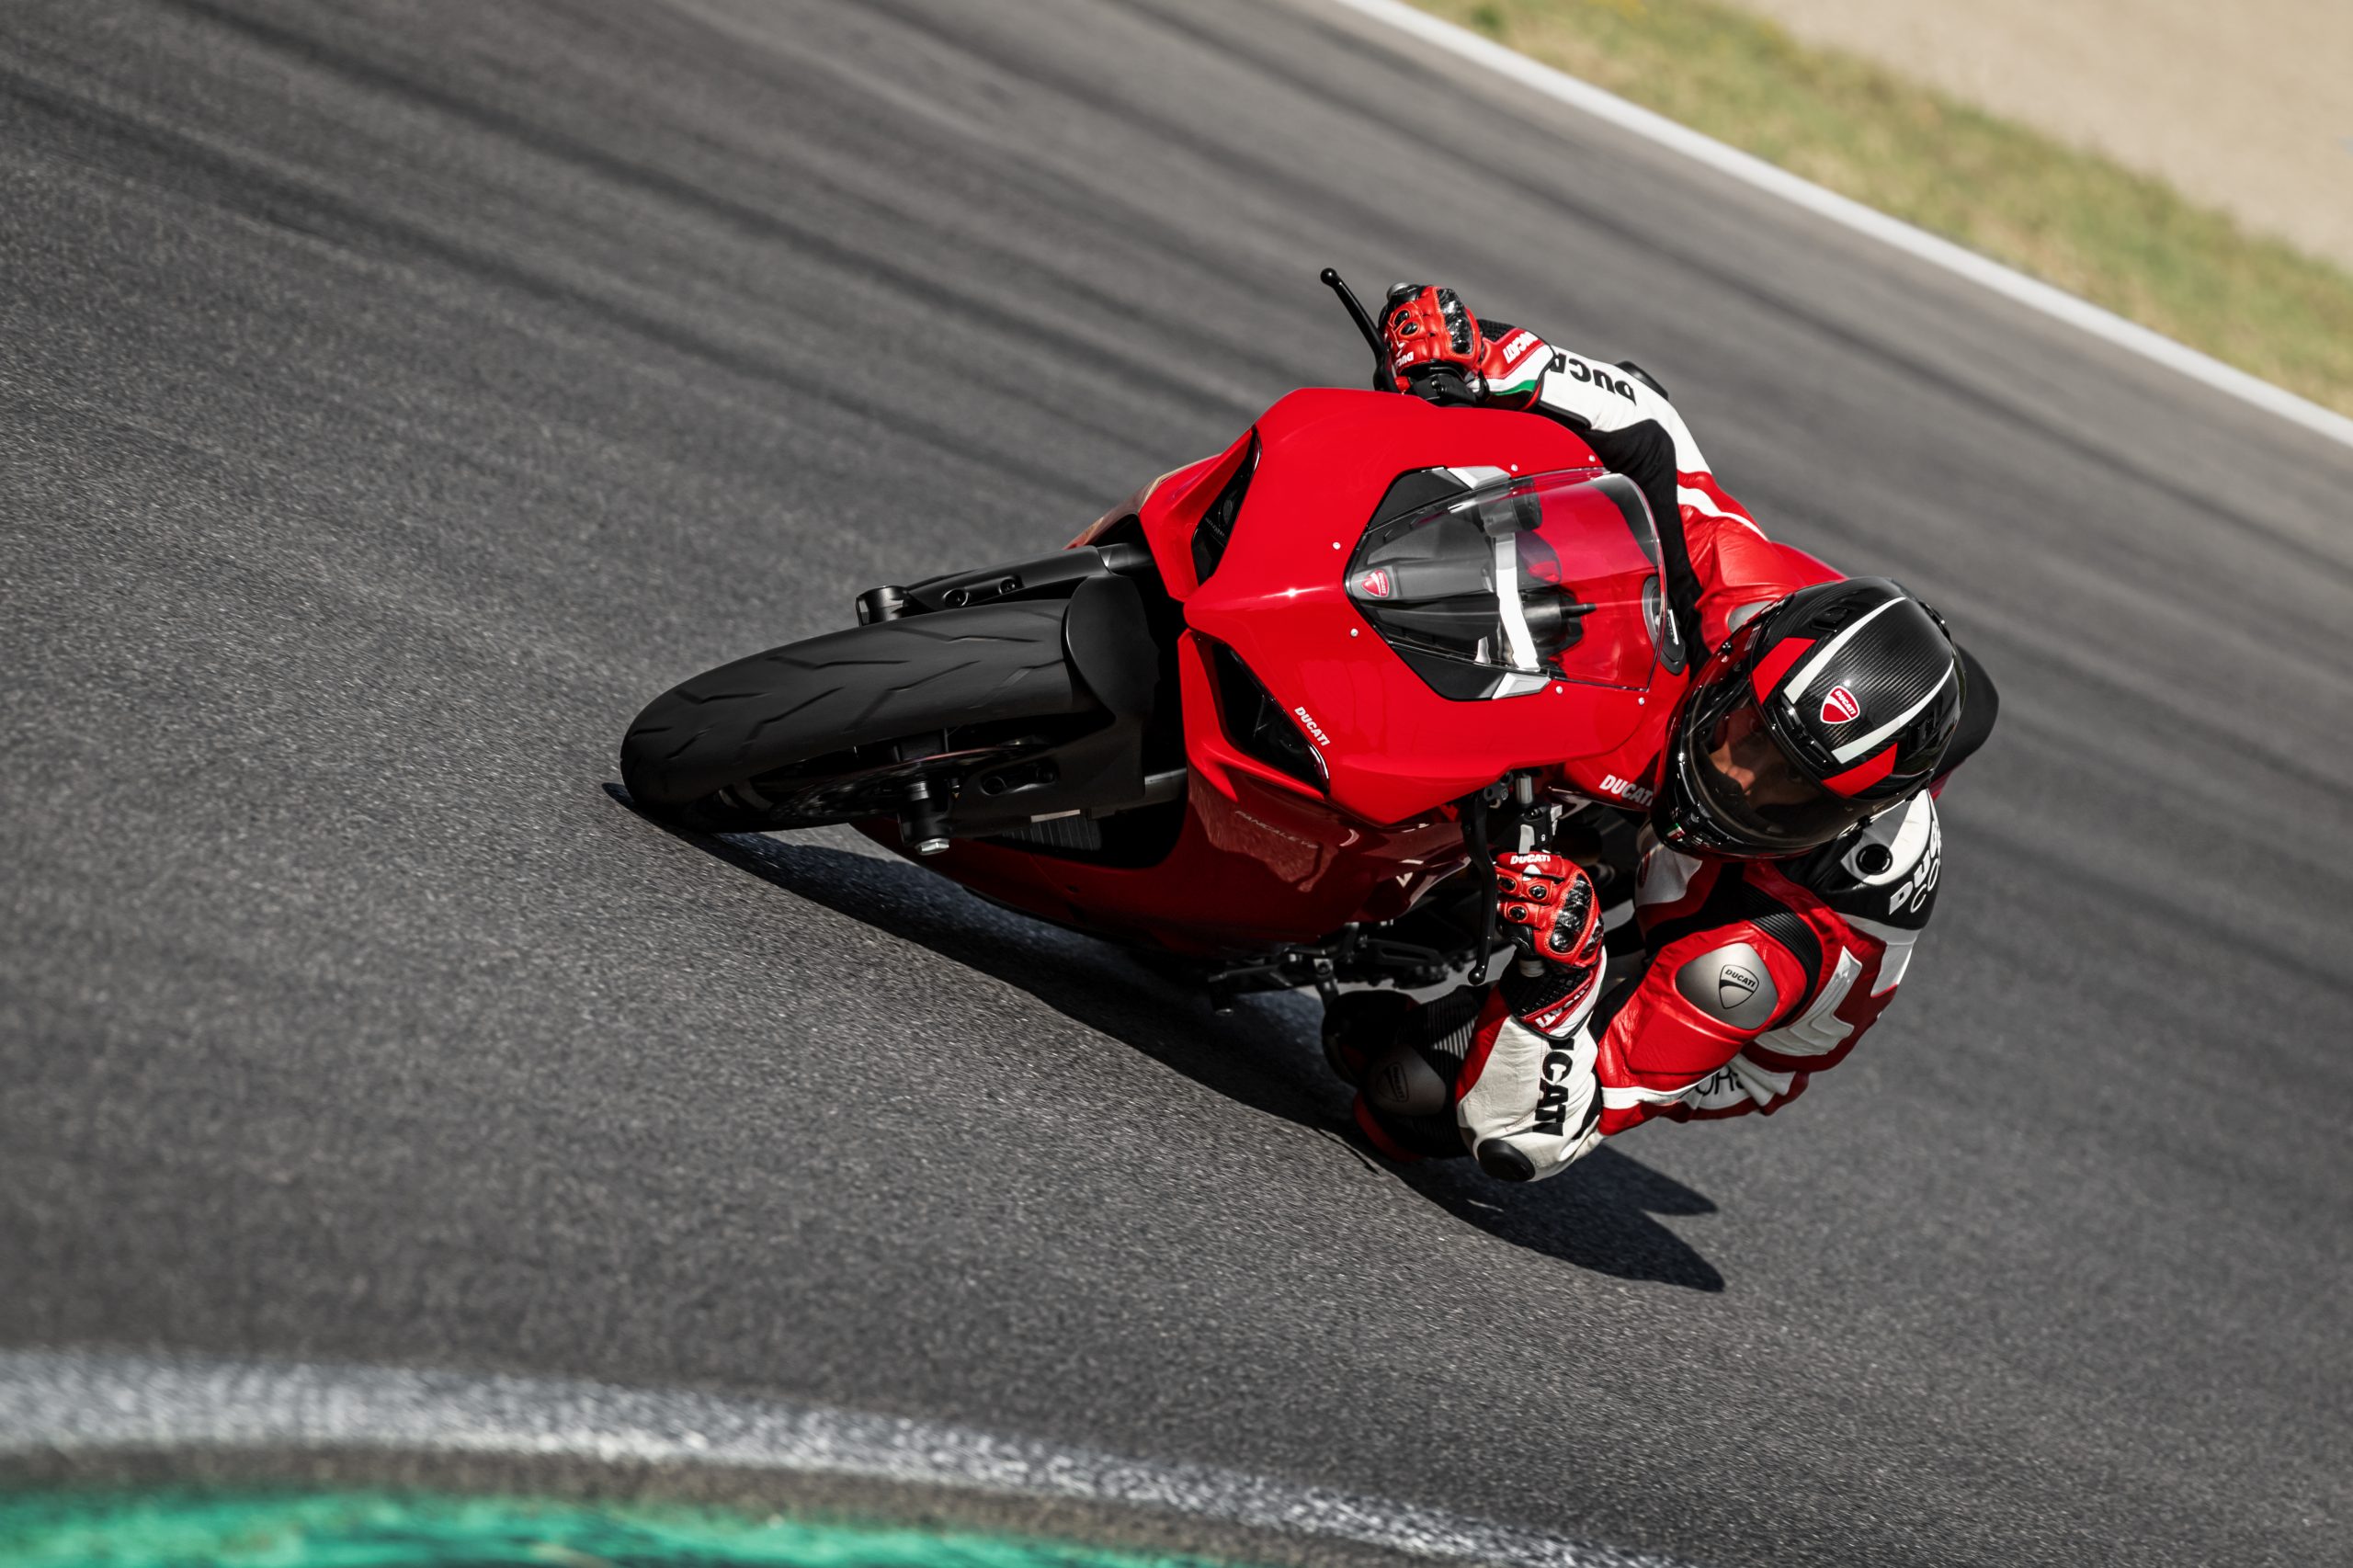 DUCATI_PANIGALE V2_AMBIENCE_15_UC101503_High